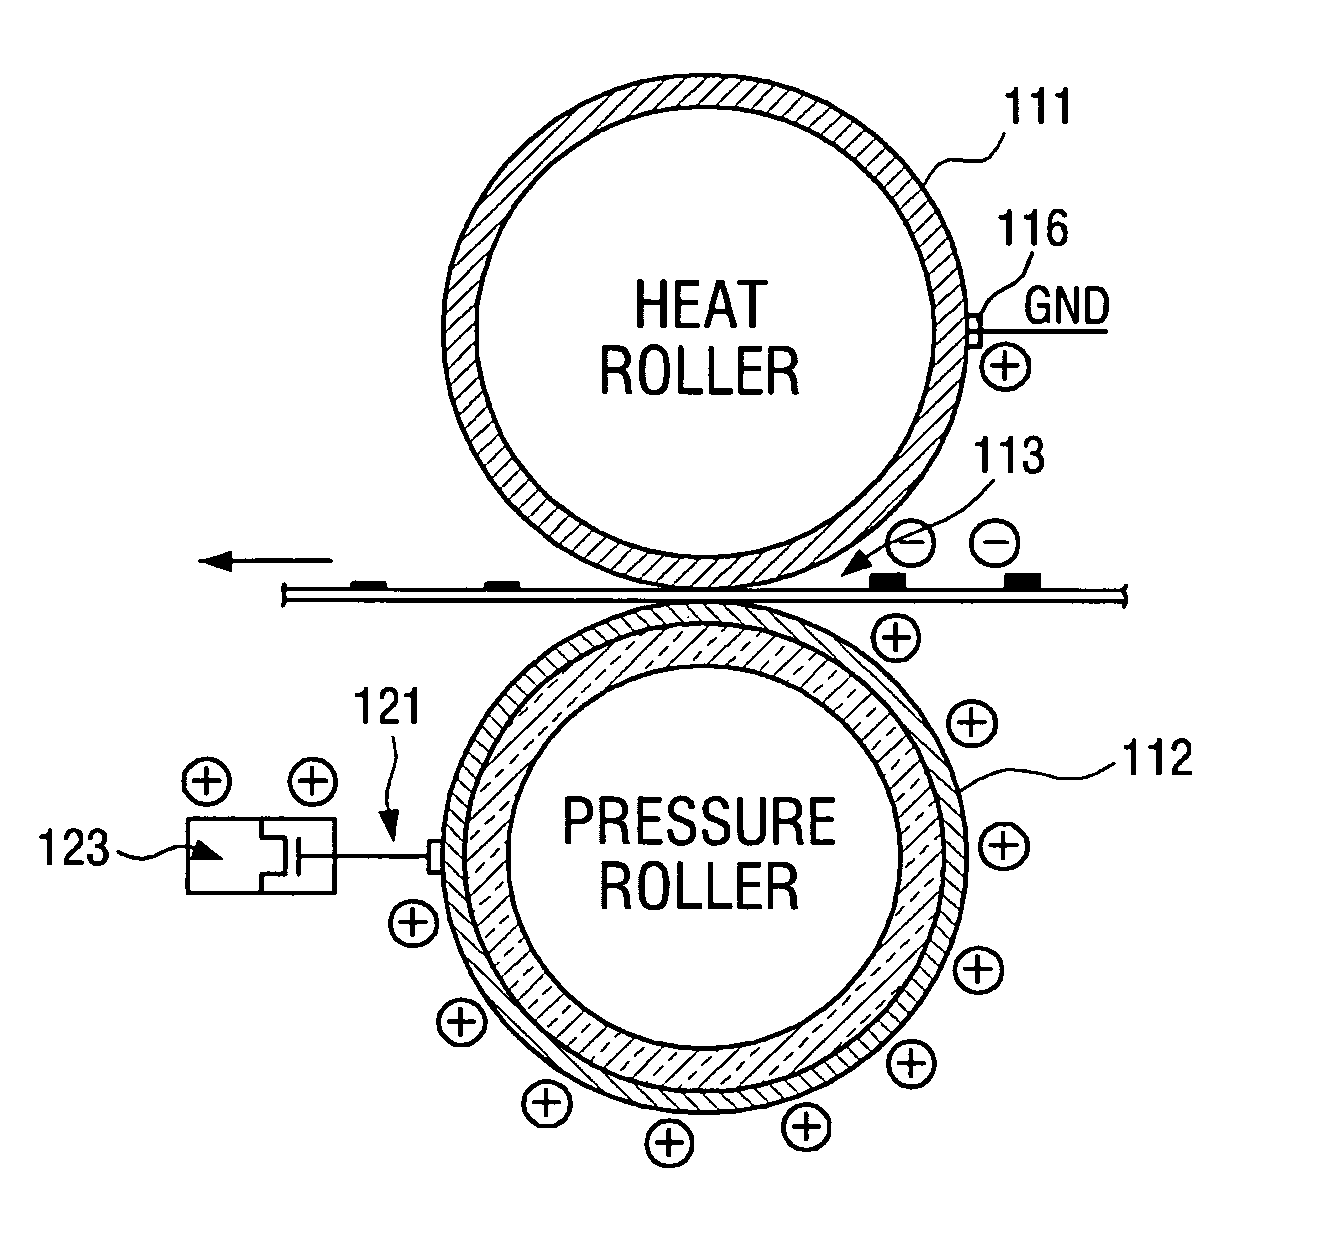 Image forming apparatus and method for controlling fuser thereof